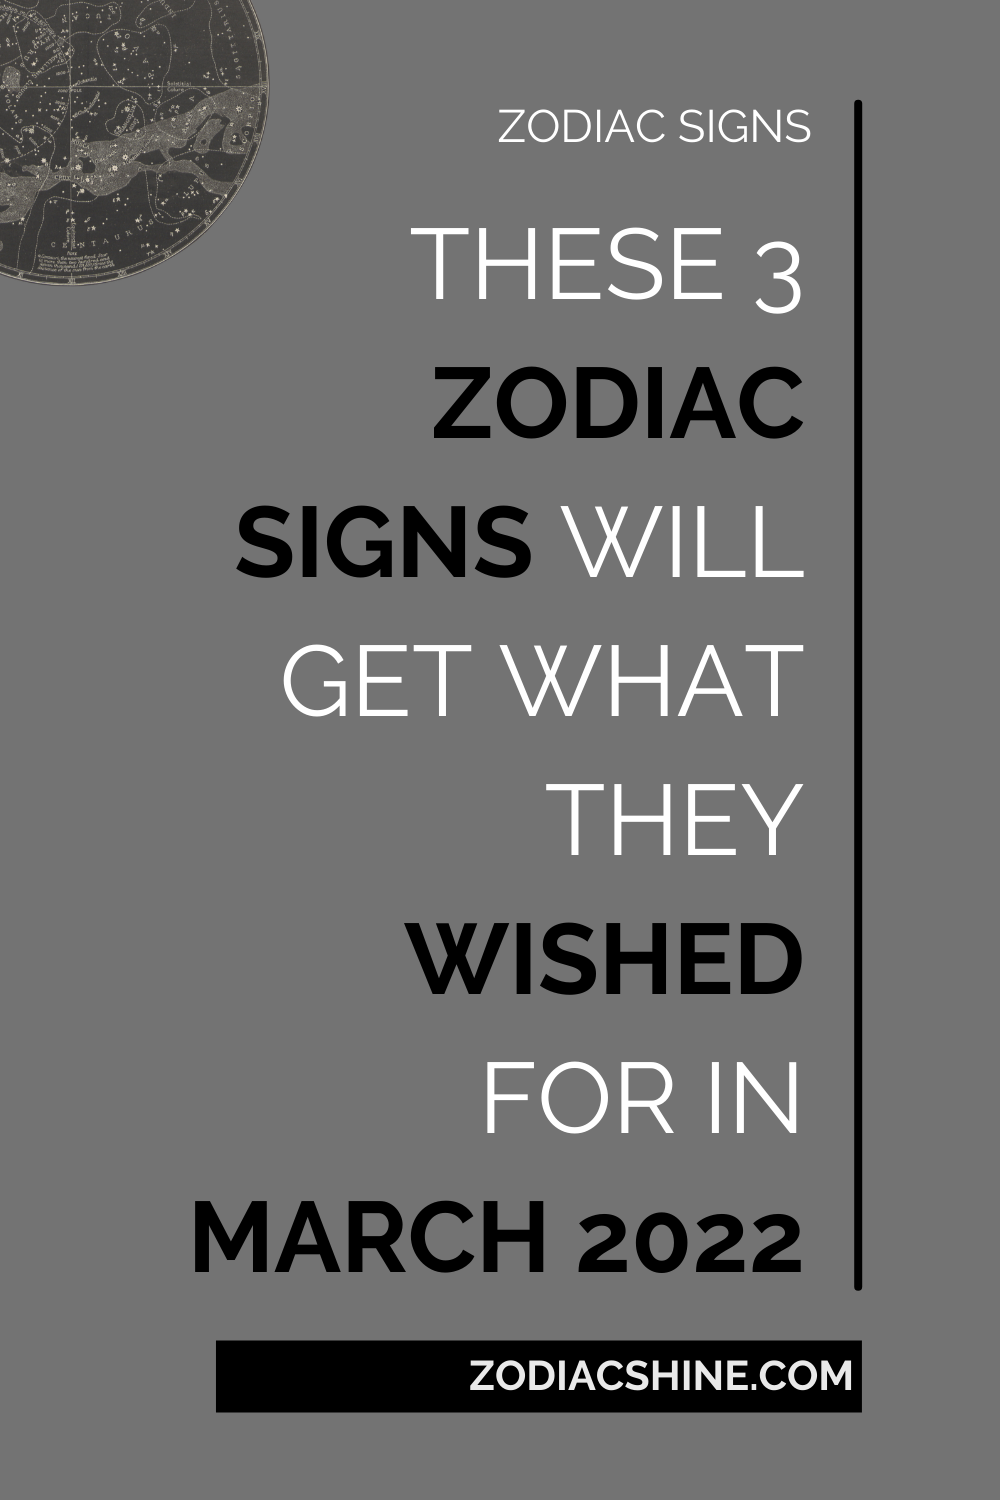 These 3 Zodiac Signs Will Get What They Wished For In March 2022